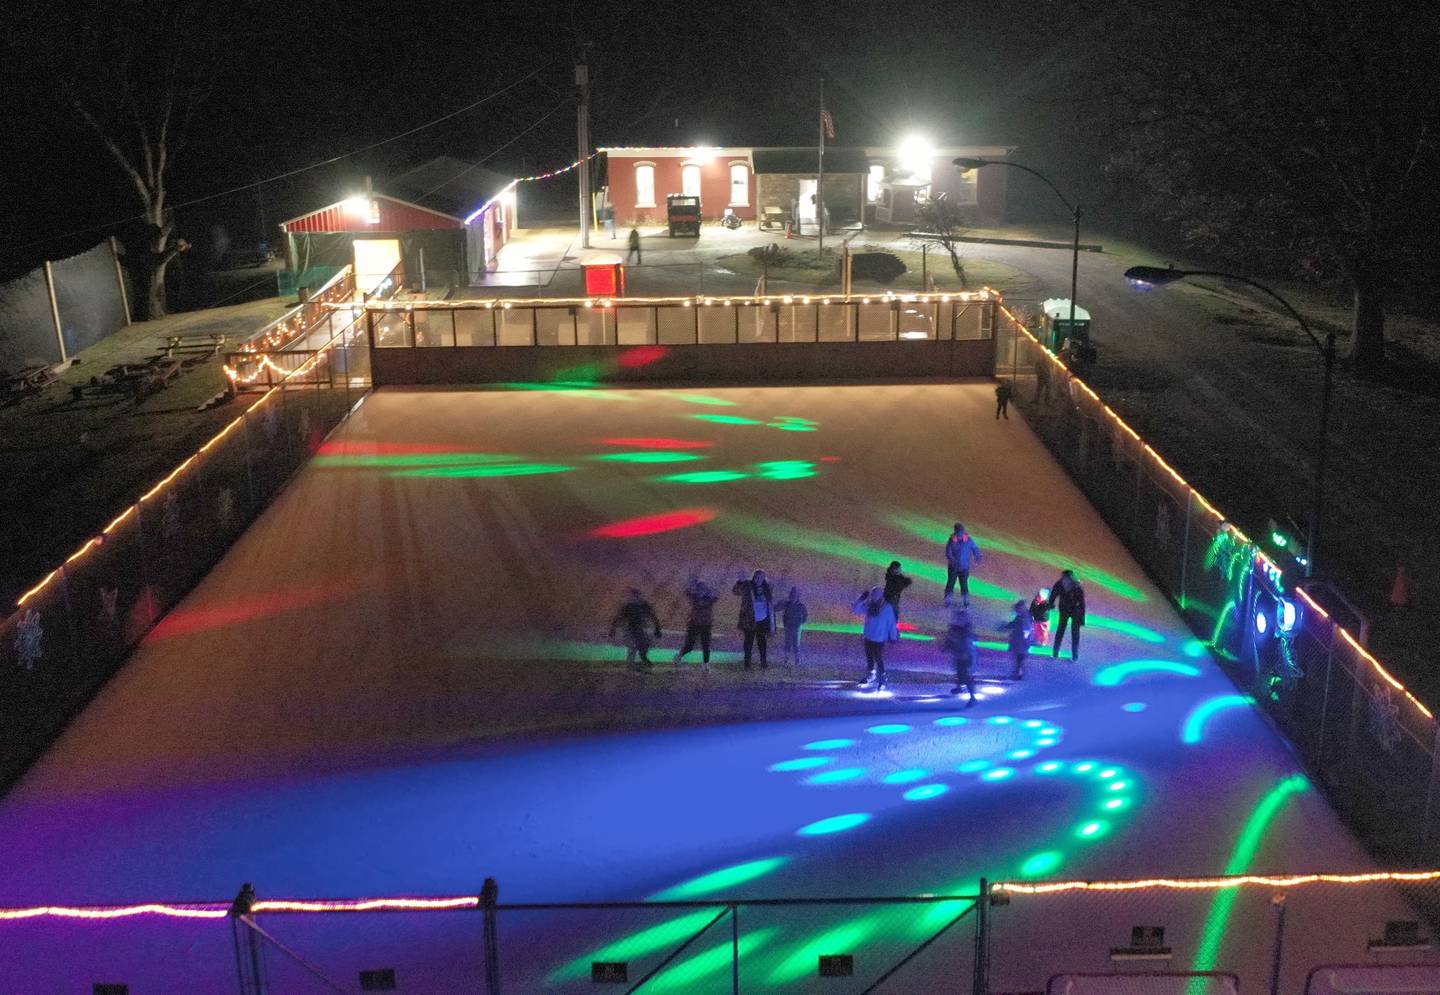 Disco lights accompanied by music fills the ice rink at Echo Bluff Park on Saturday, Dec. 9, 2022 in Spring Valley. The park has a chiller allowing skating all season long. The disco lights are every Friday night from 5-8p.m. Skating is available seven days a week. For additional times visit www.echobluff.org.